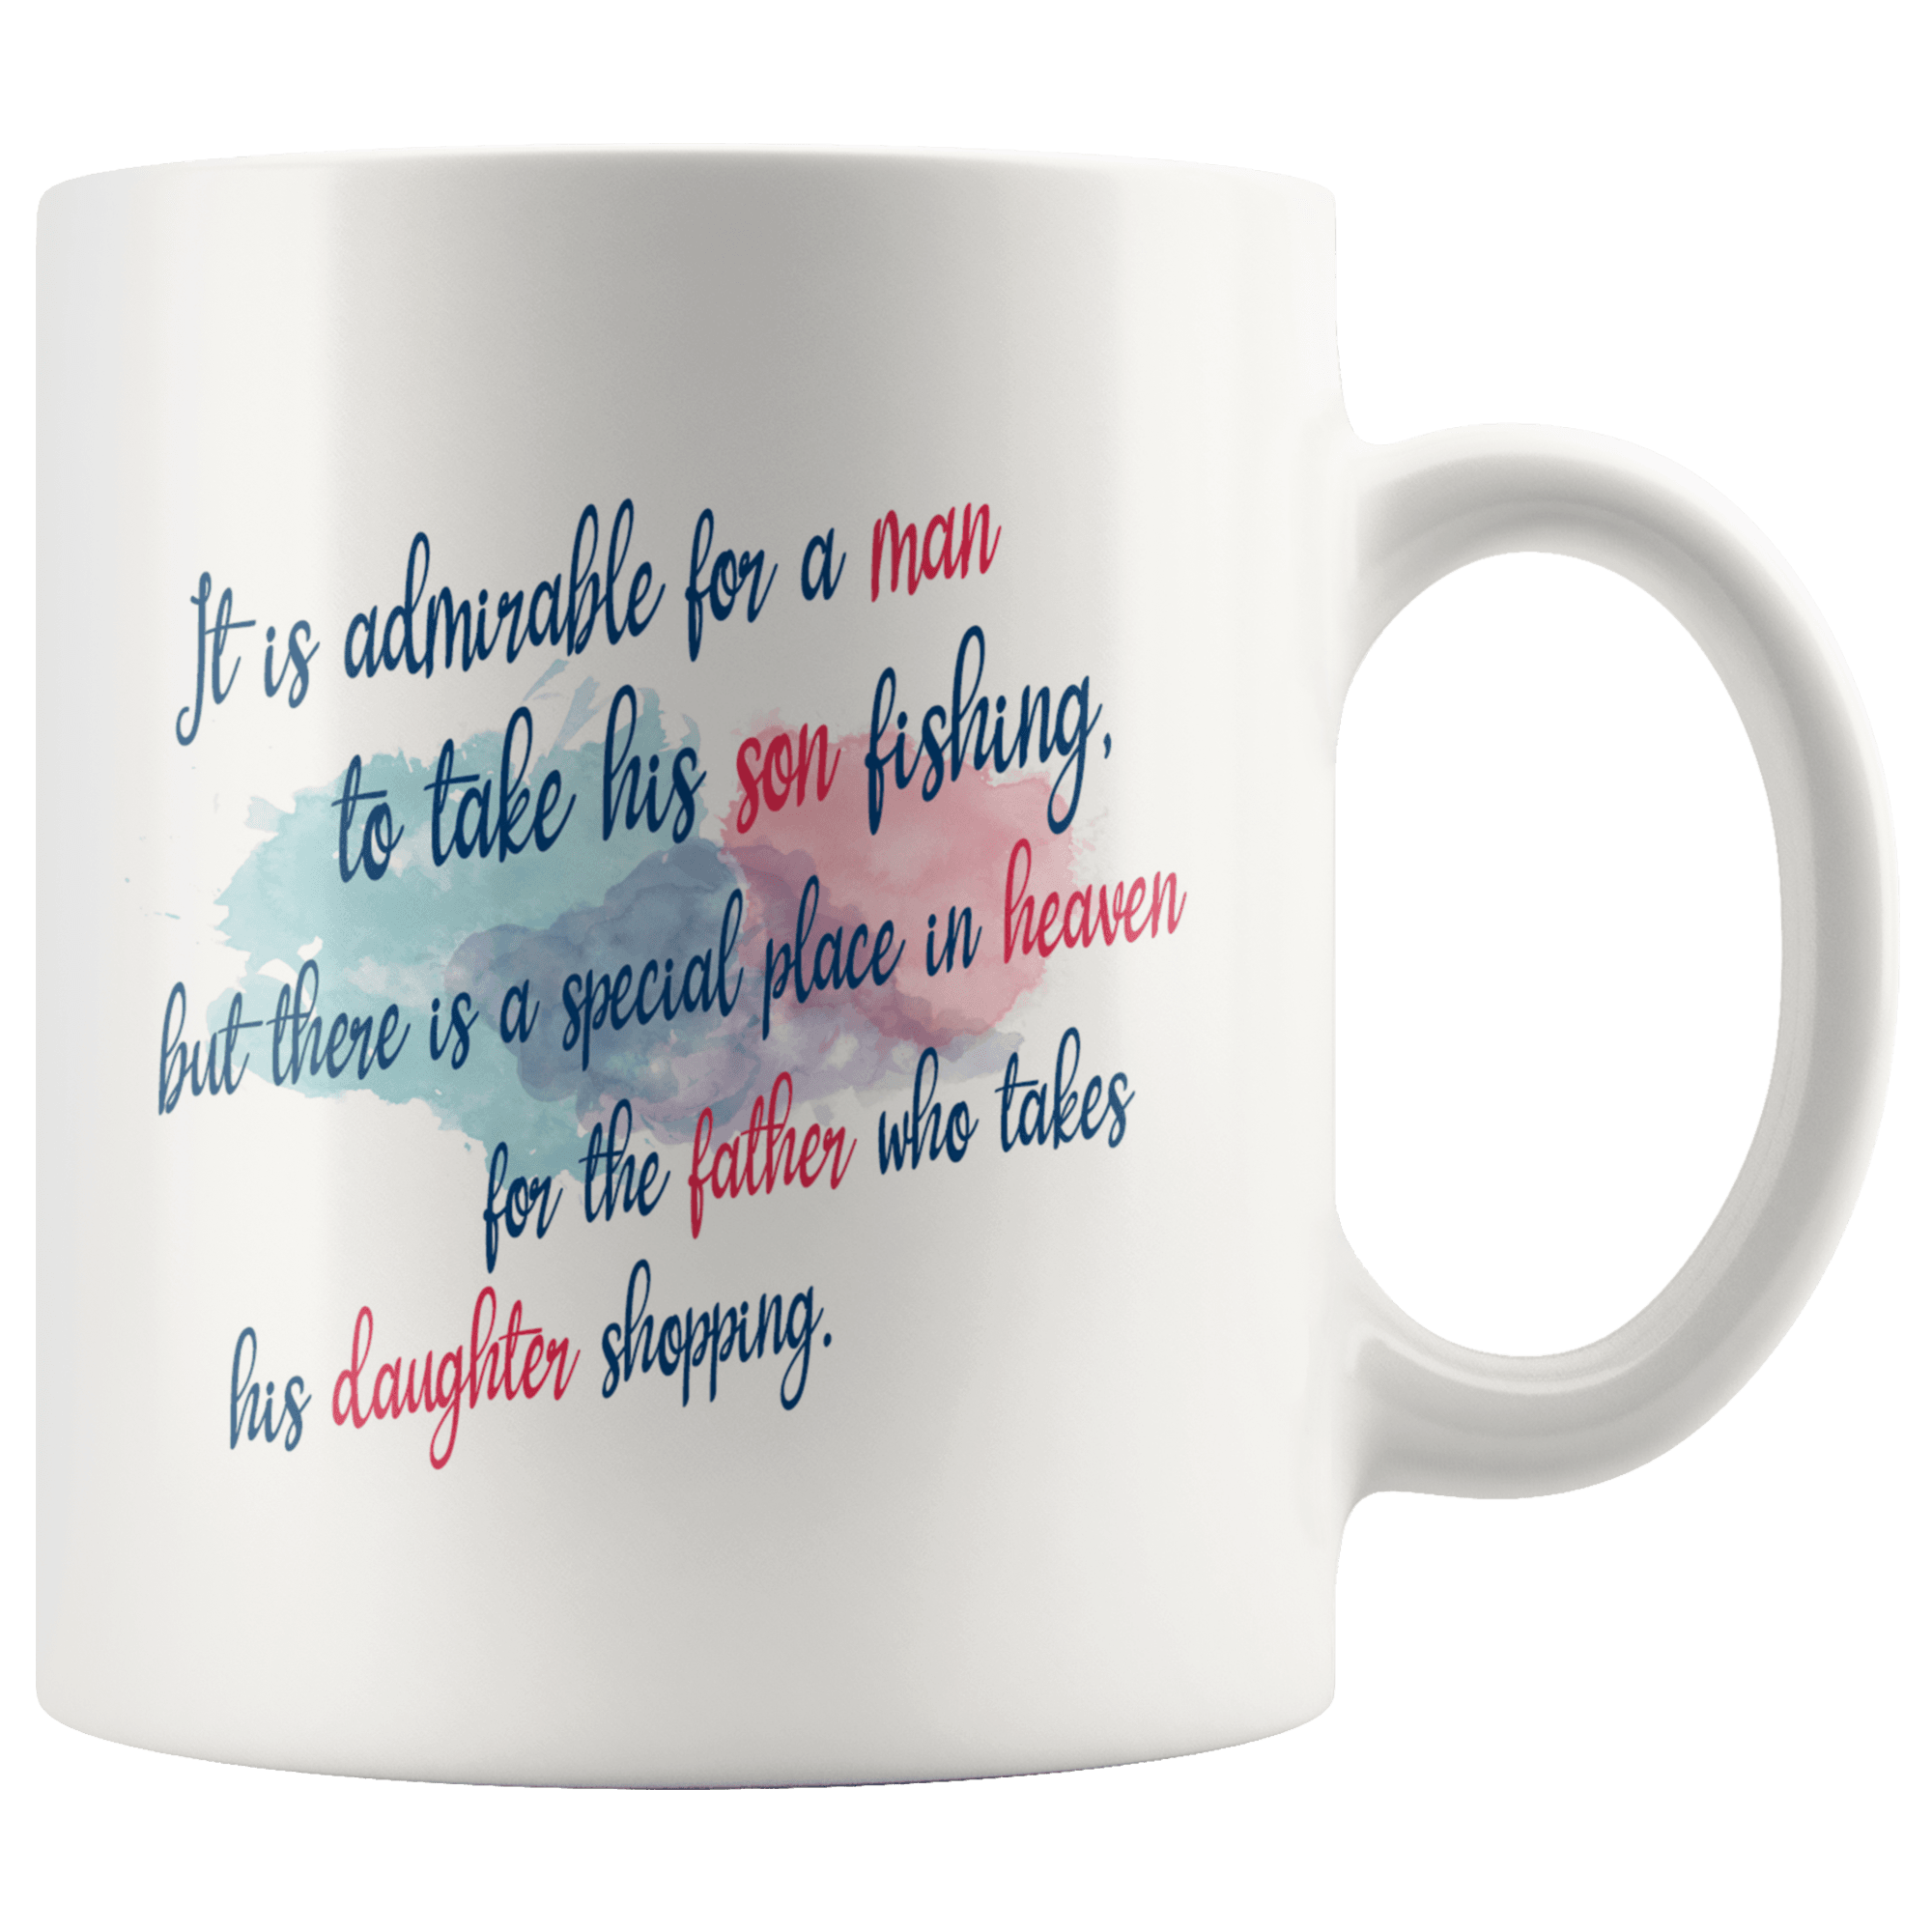 Great Coffee Mug For Father - It Is Admirable For A Man To Take His Son Fishing, But There Is A Special Place In Heaven For The Father Who Takes His Daughter Shopping. - SPCM